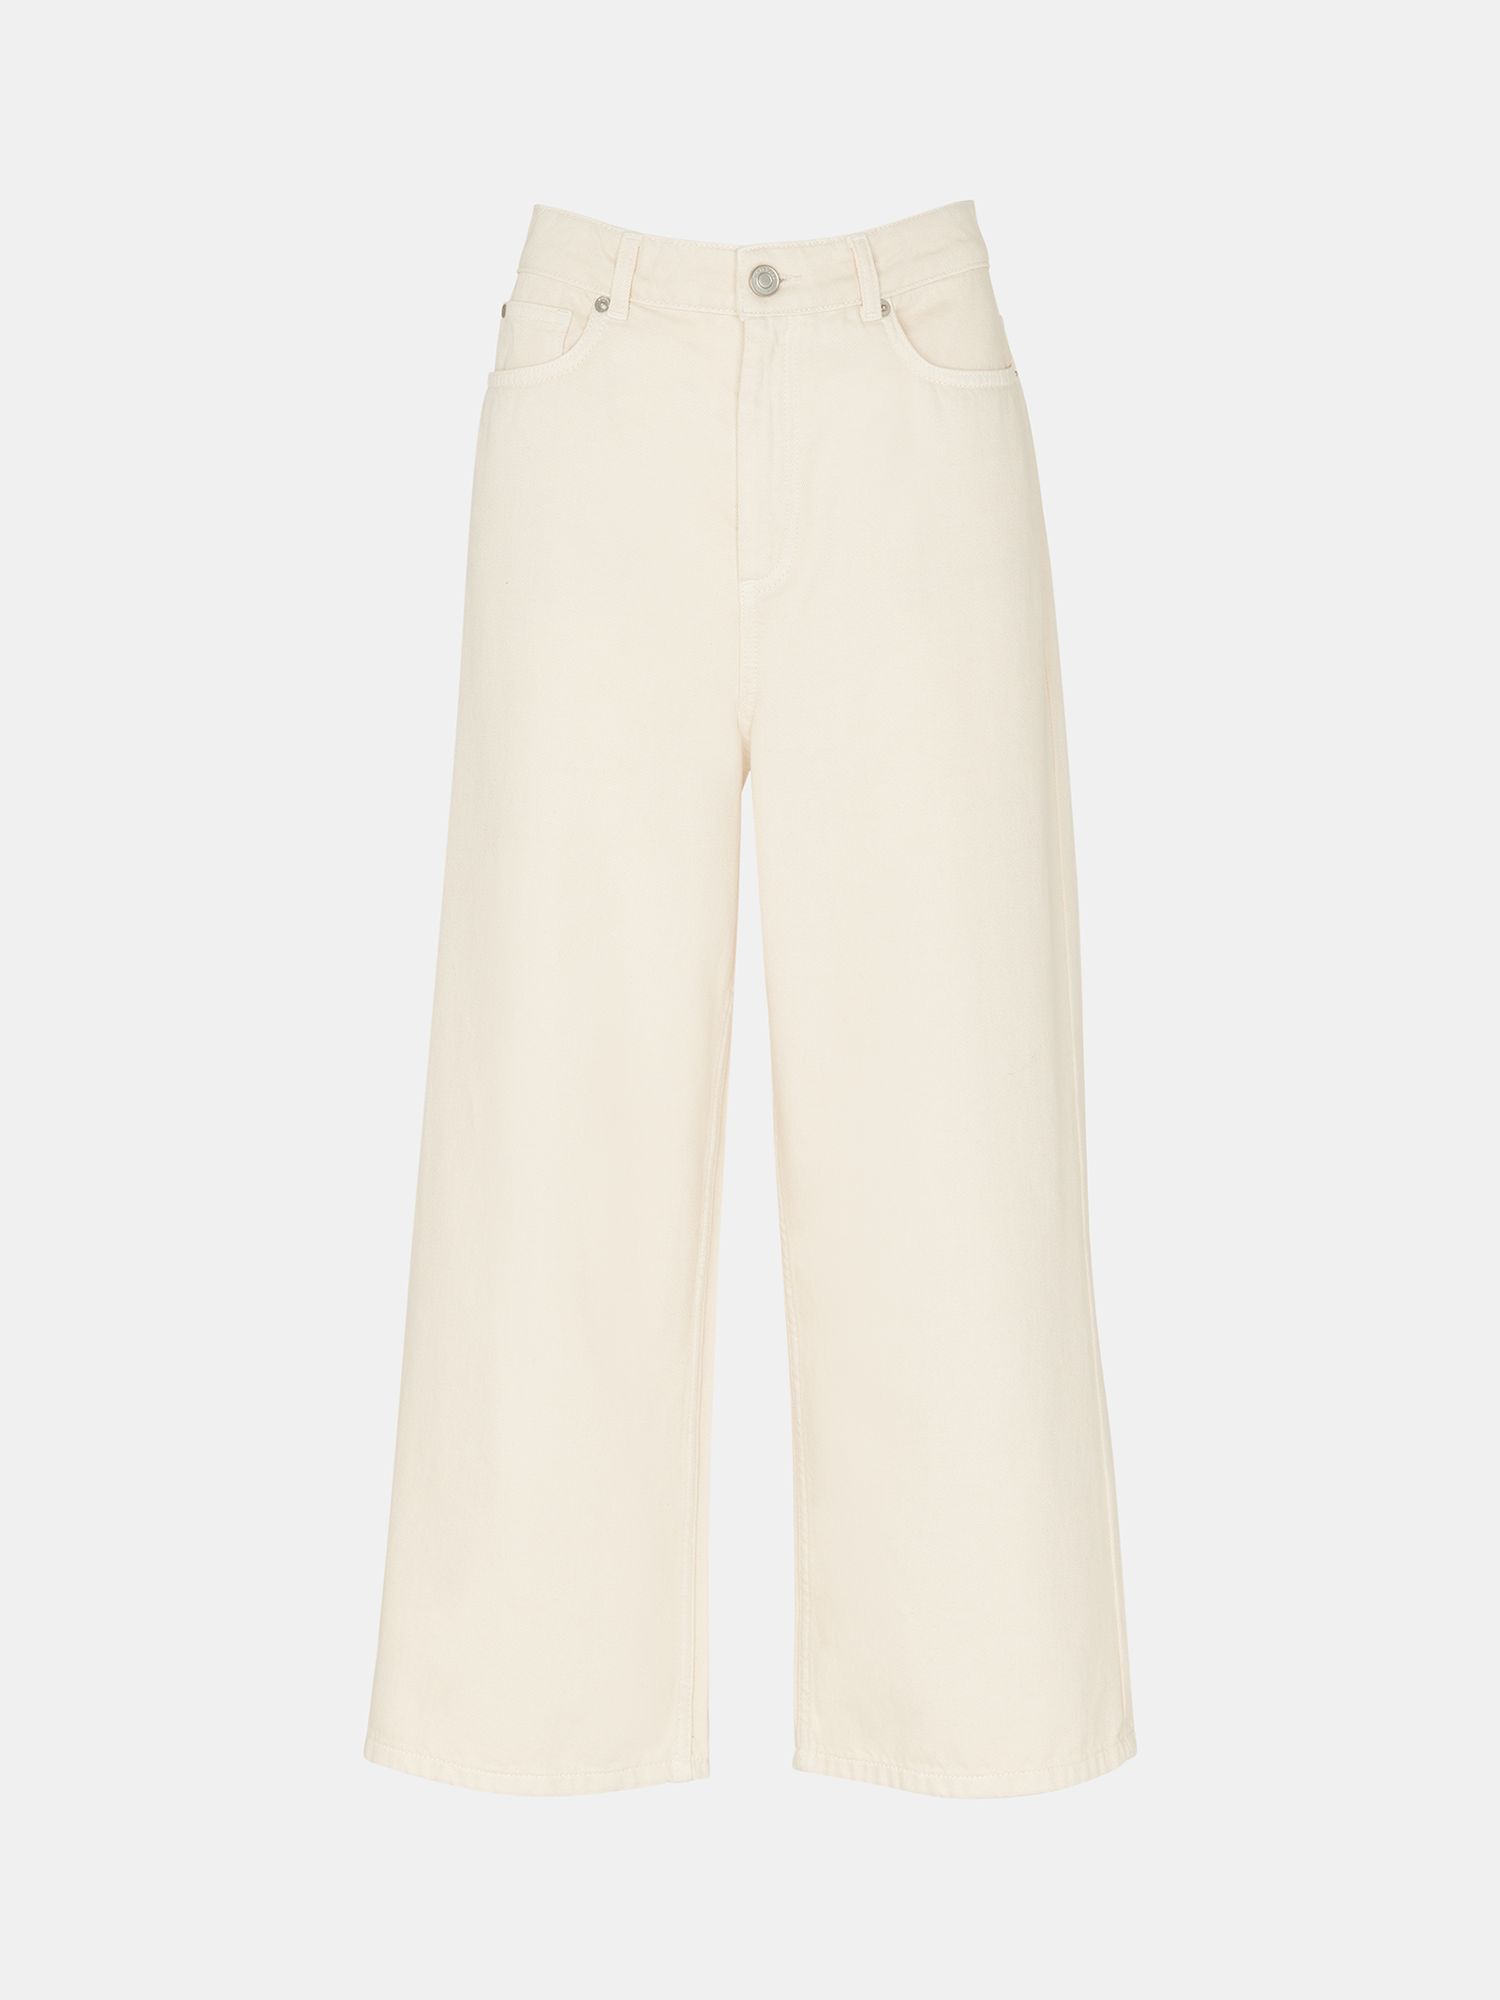 Buy Whistles Wide Leg Cropped Jeans, White Online at johnlewis.com